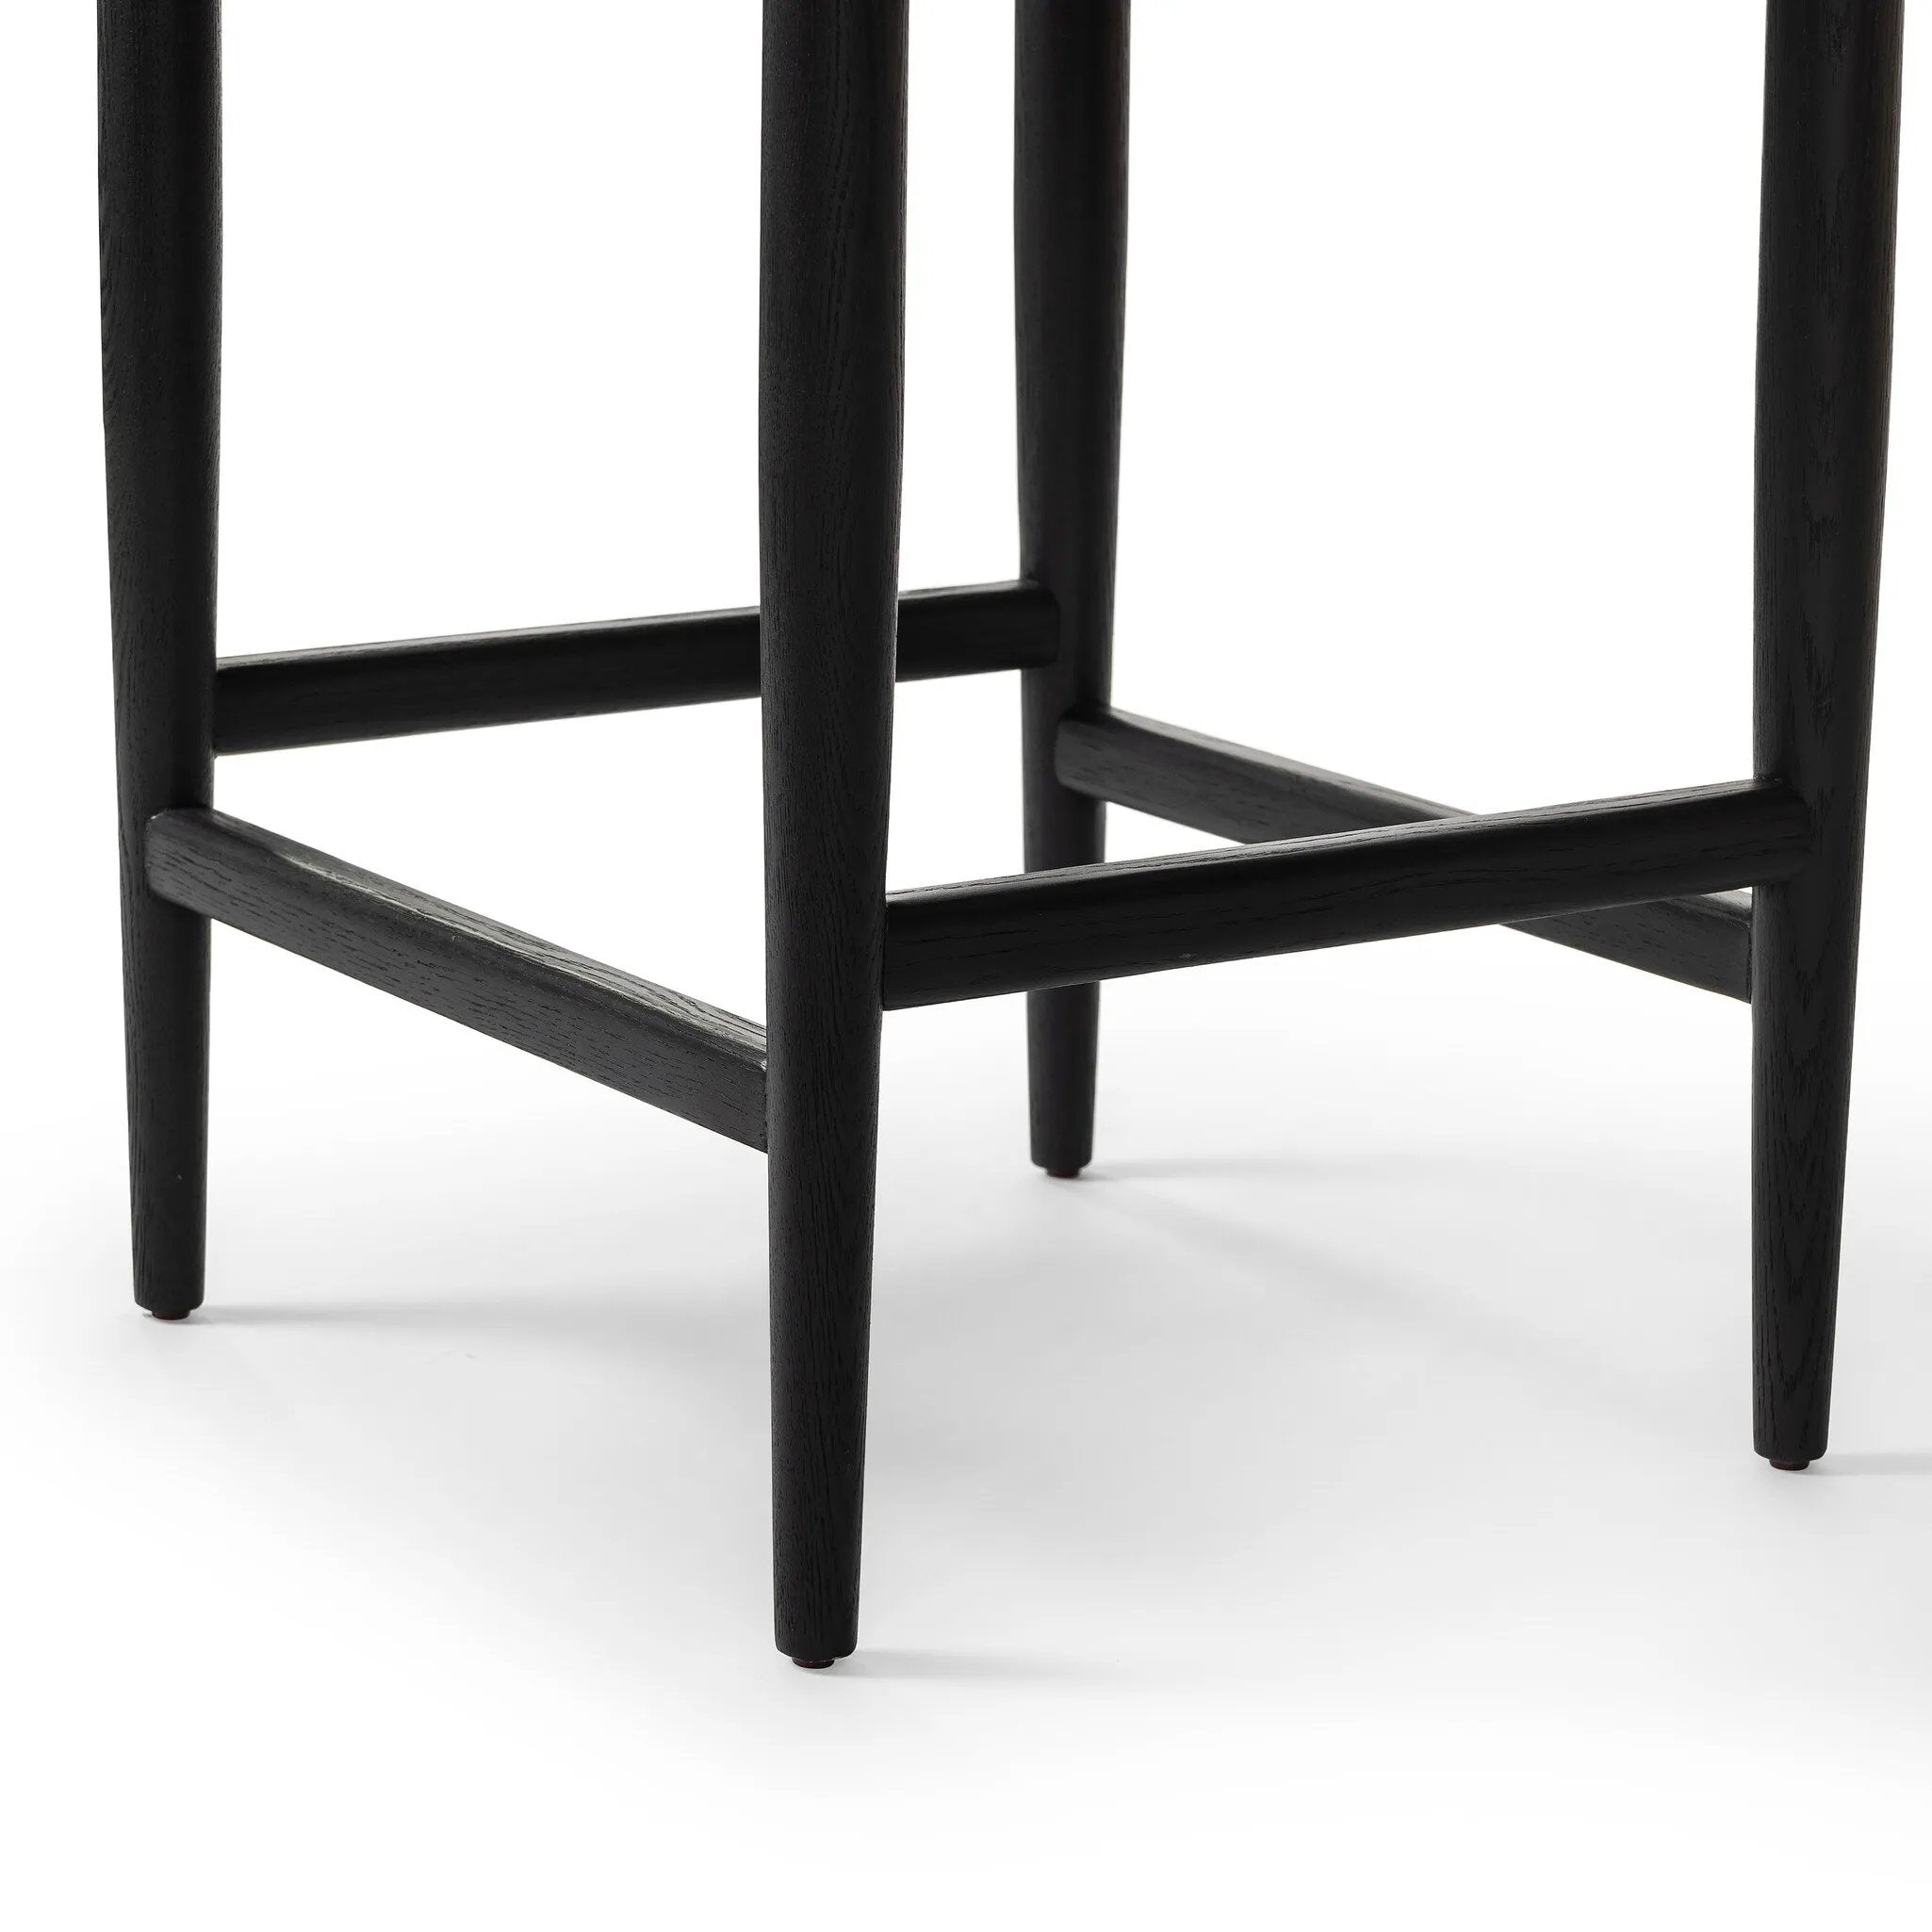 Monochromatic meets midcentury with this counter-height stool. Structured while comfortable, the tapered-leg chair pairs an ebony wood frame with a faux leather cushion.Collection: Ashfor Amethyst Home provides interior design, new home construction design consulting, vintage area rugs, and lighting in the Tampa metro area.